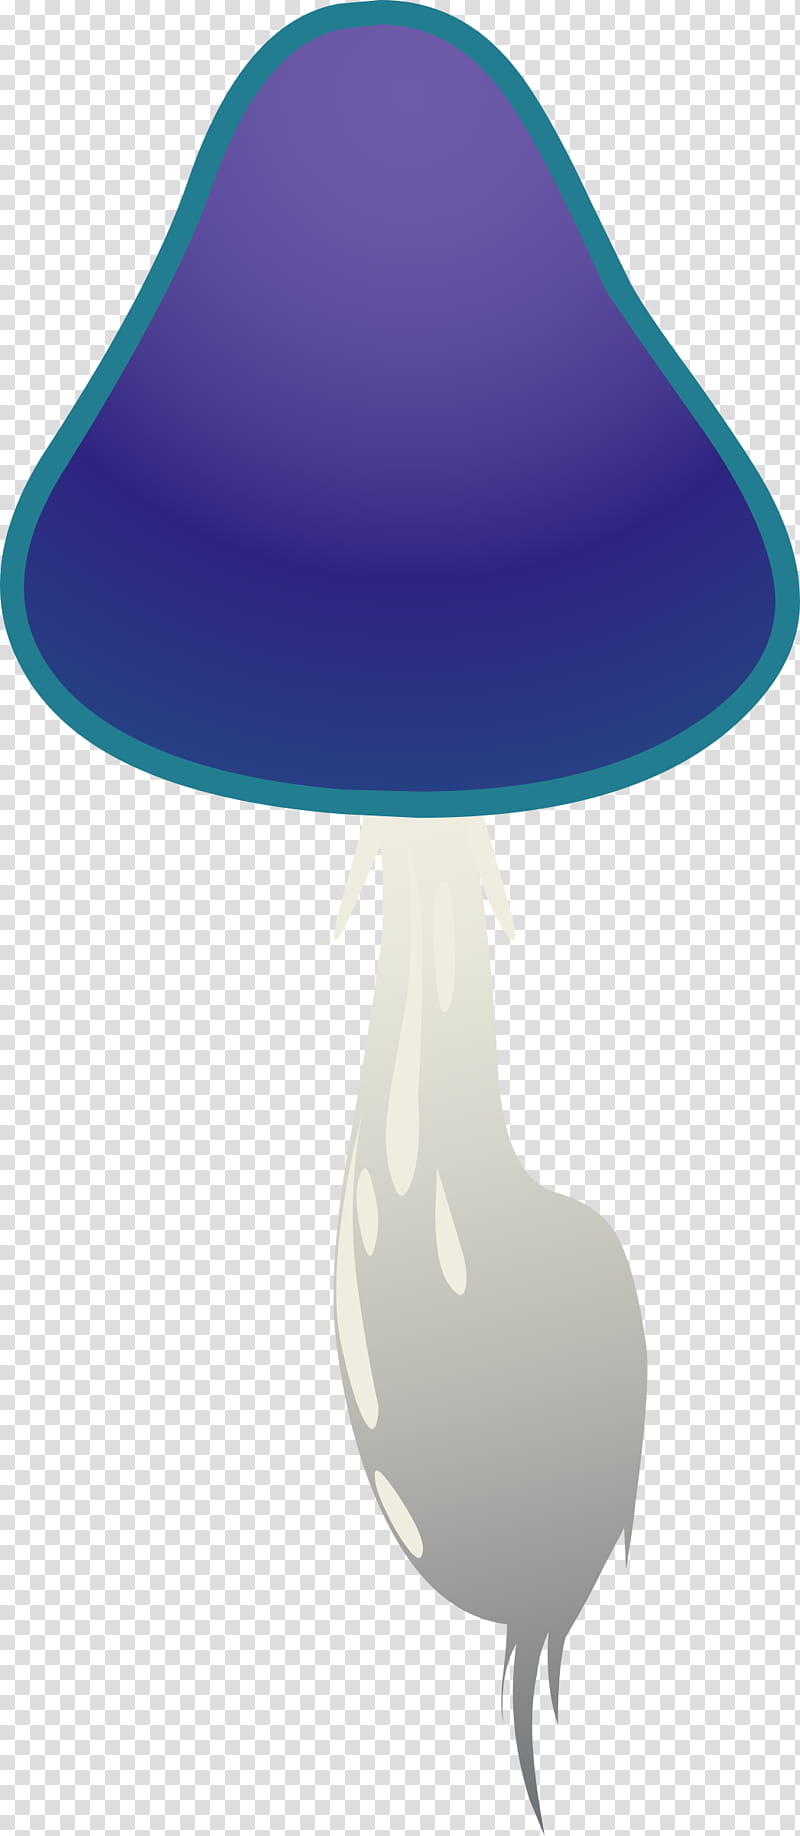 Mushroom, Fungus, Pileus, Food, Mold, Blue, Turquoise, Table transparent background PNG clipart